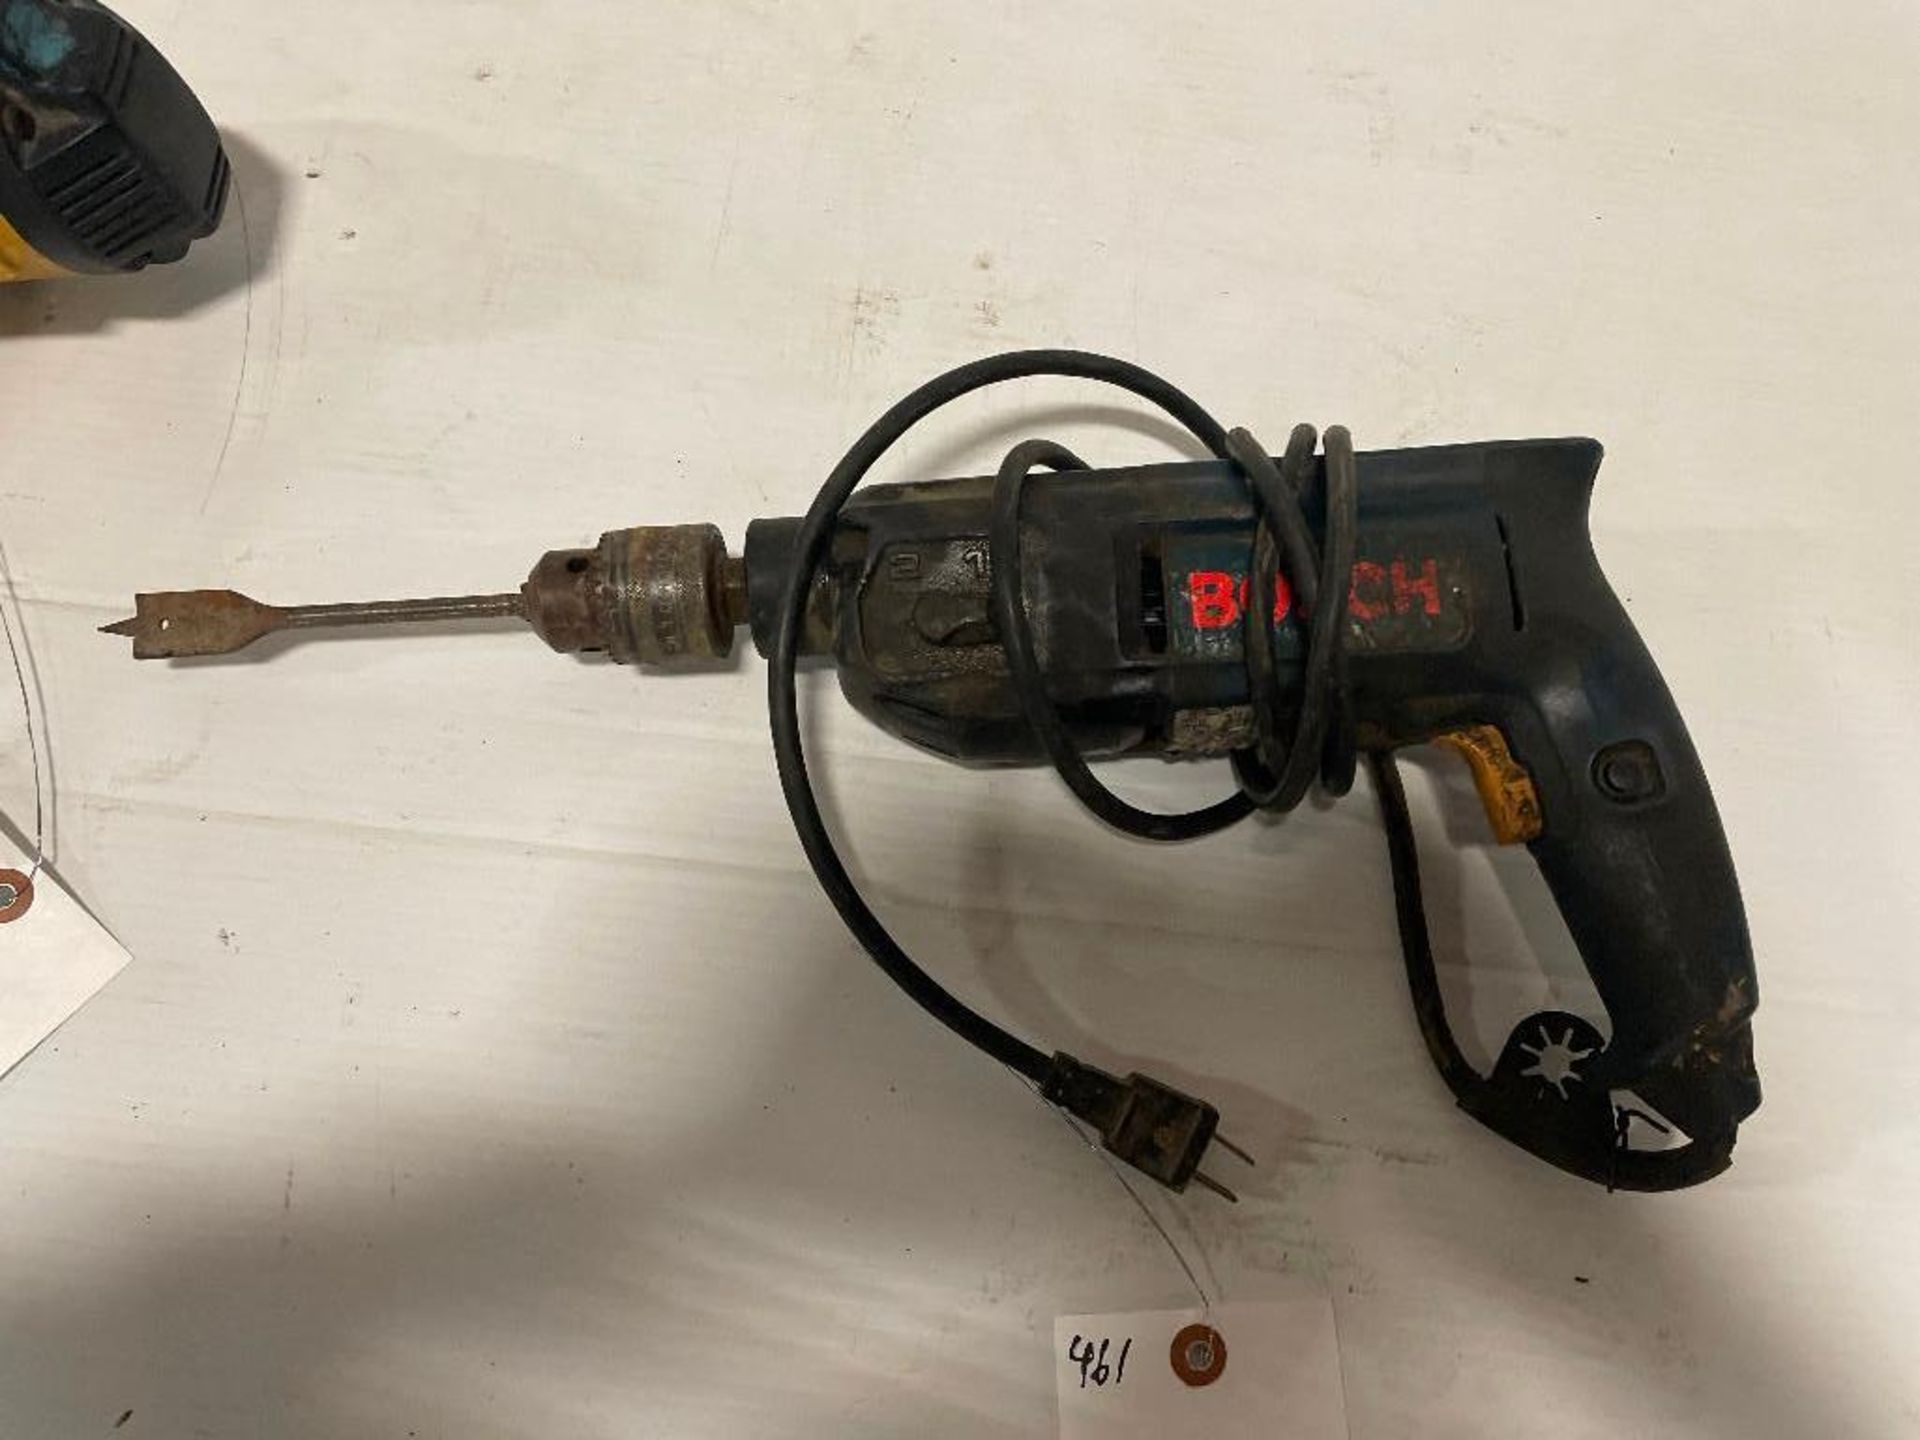 Bosch 1/2" - 3?4" Drill with Bit, Serial #291271208, 120V. Located in Hazelwood, MO - Image 3 of 4